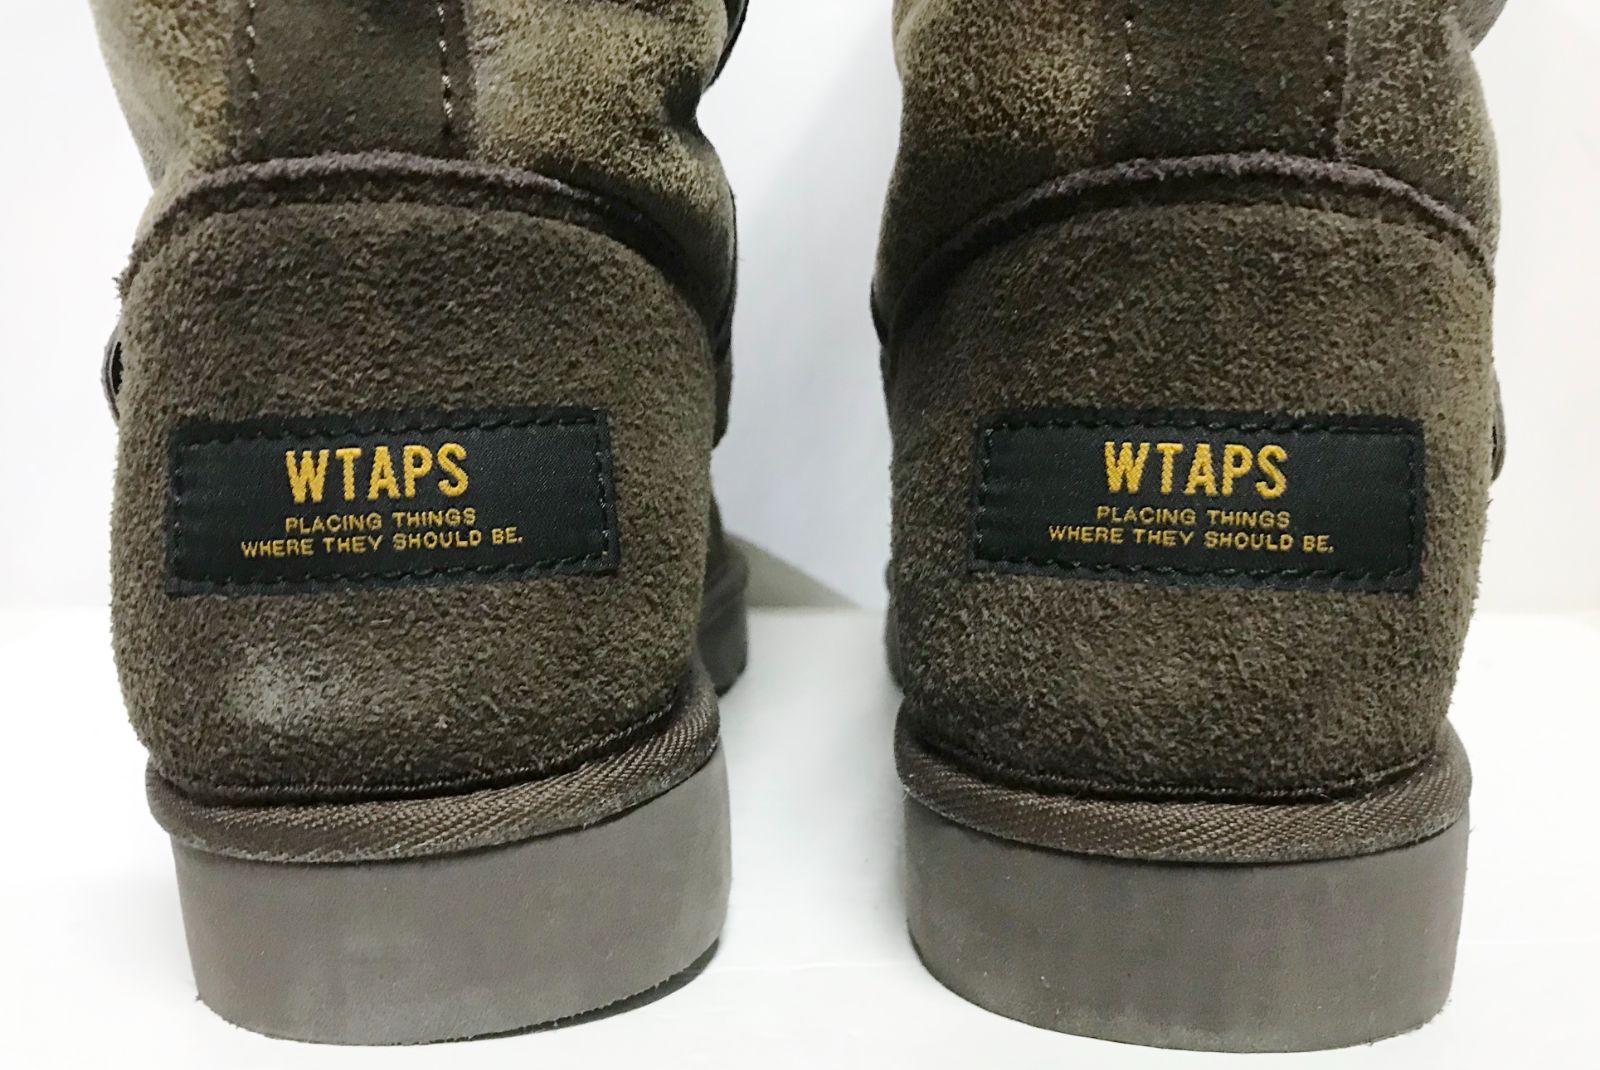 WTAPS A-6 LEATHER SHEEP BOOTS ムートンブーツ - メルカリ